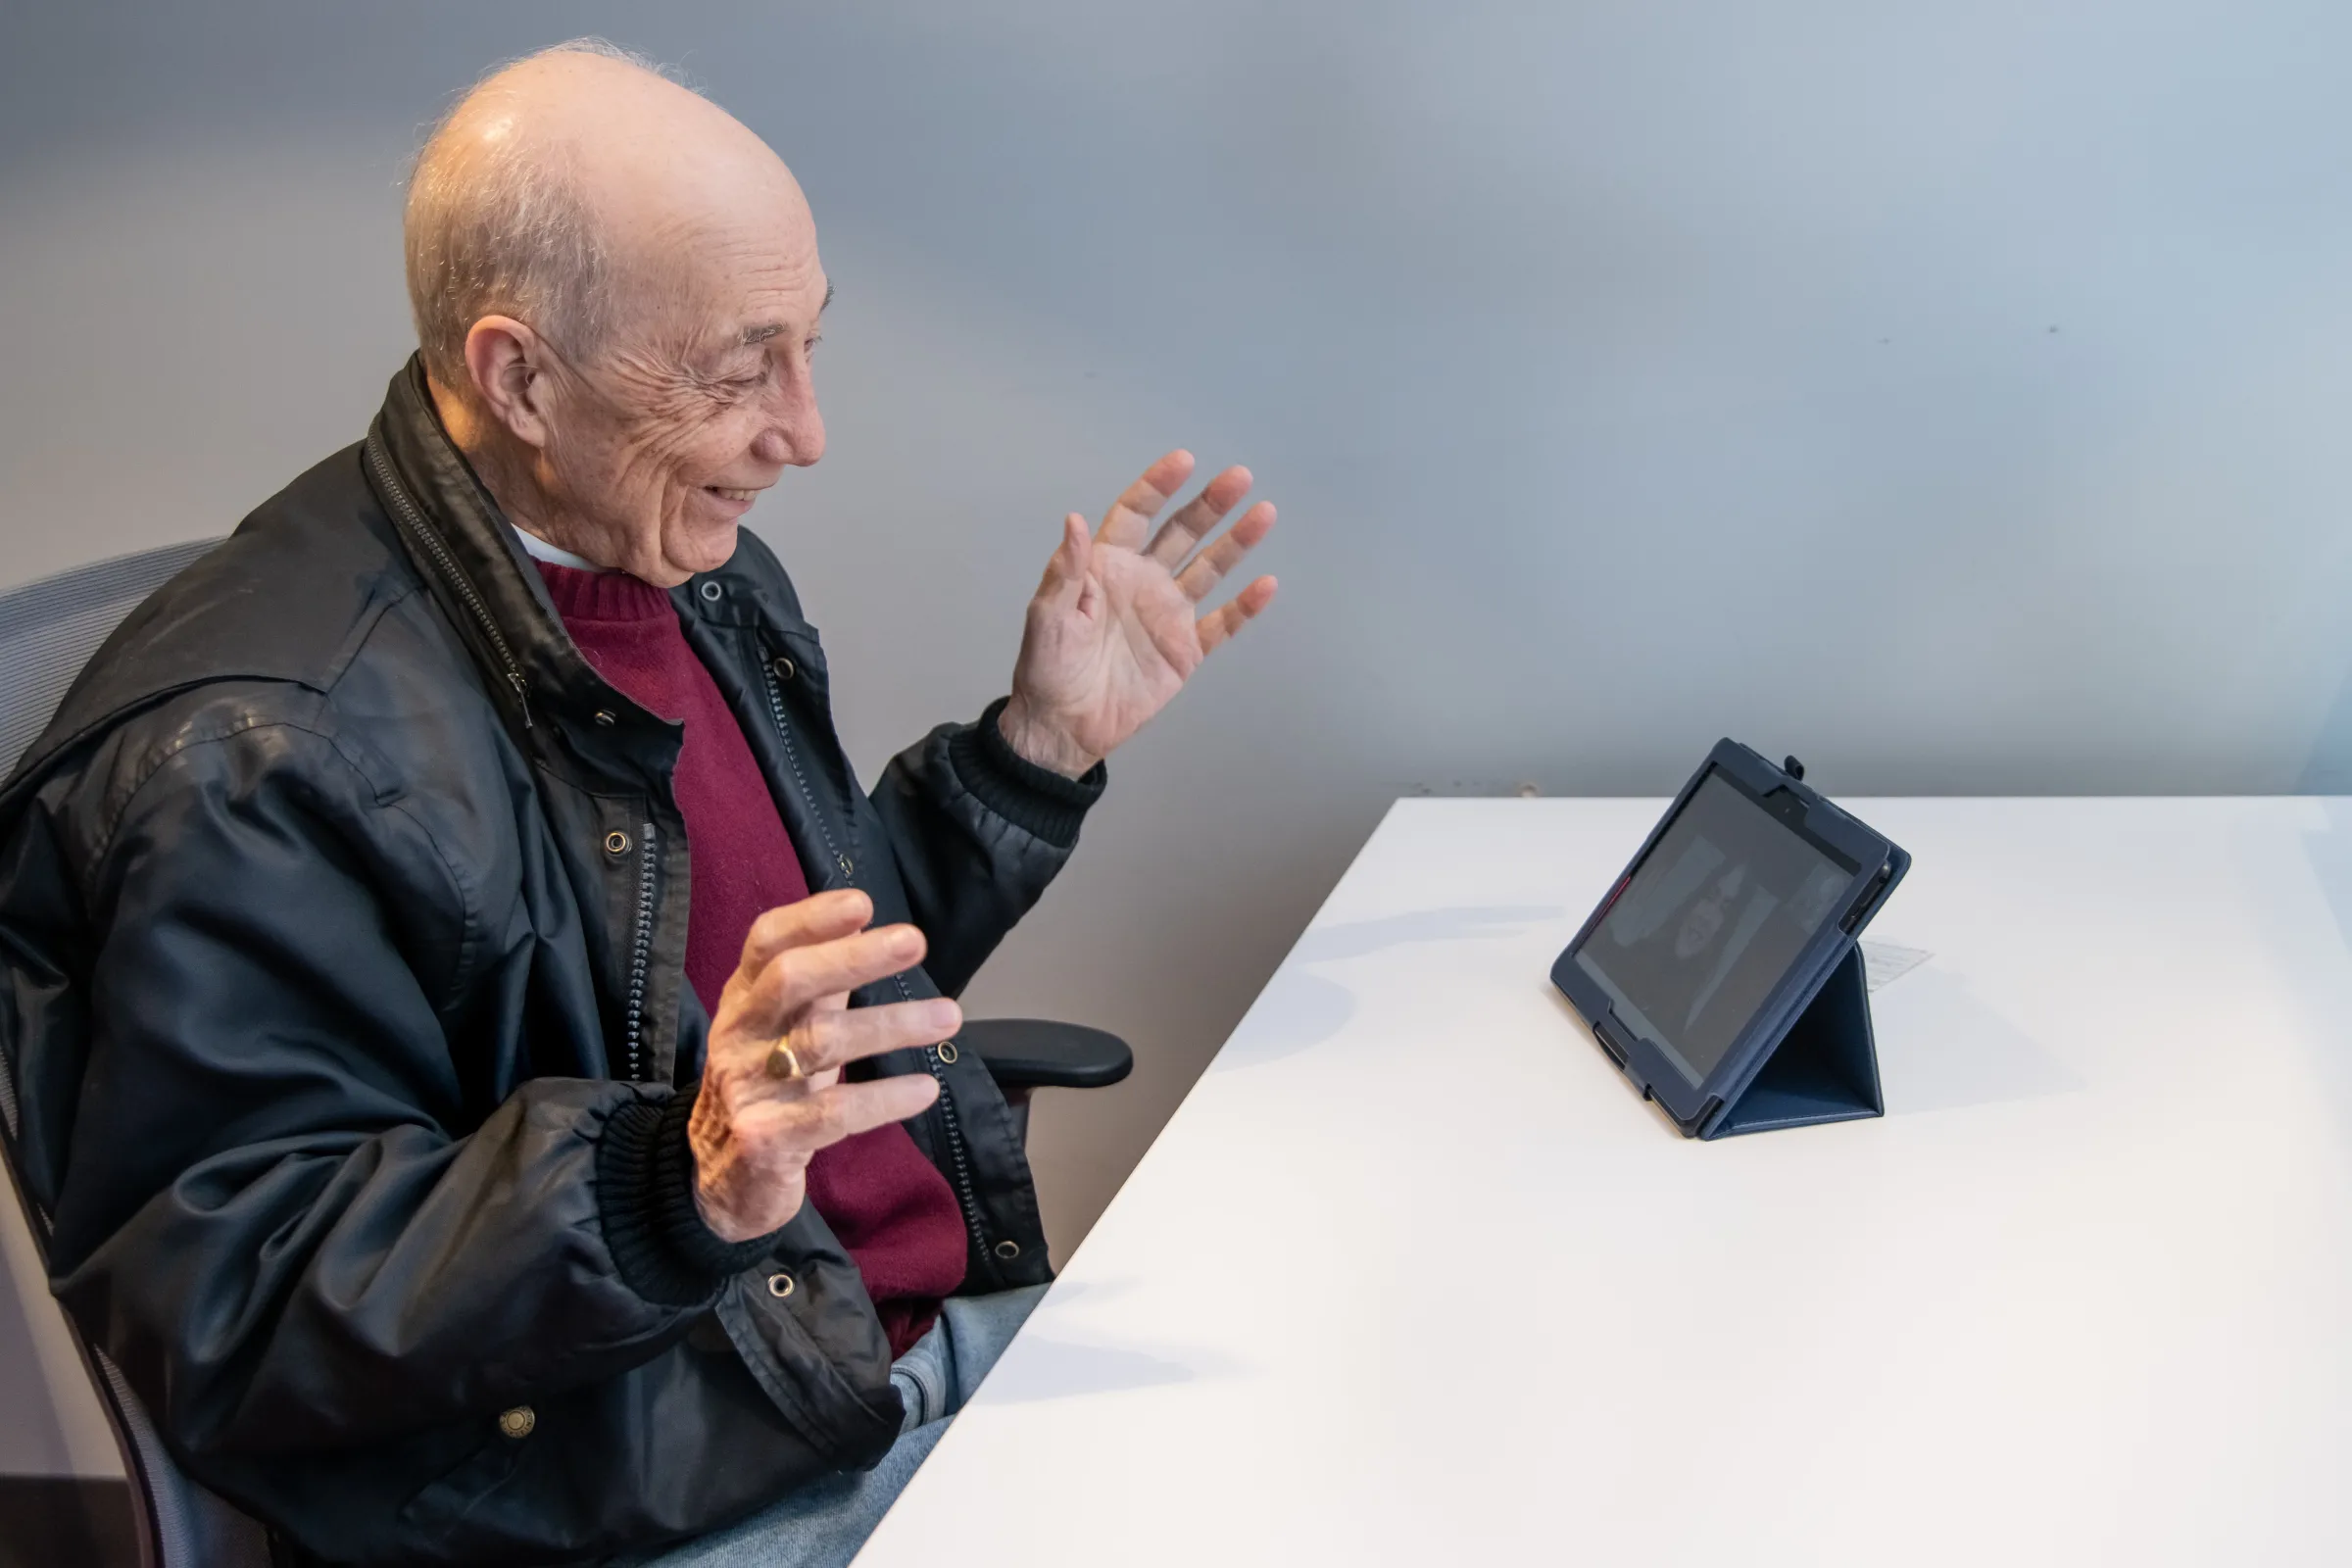 A man sat a desk speaks to someone using a tablet